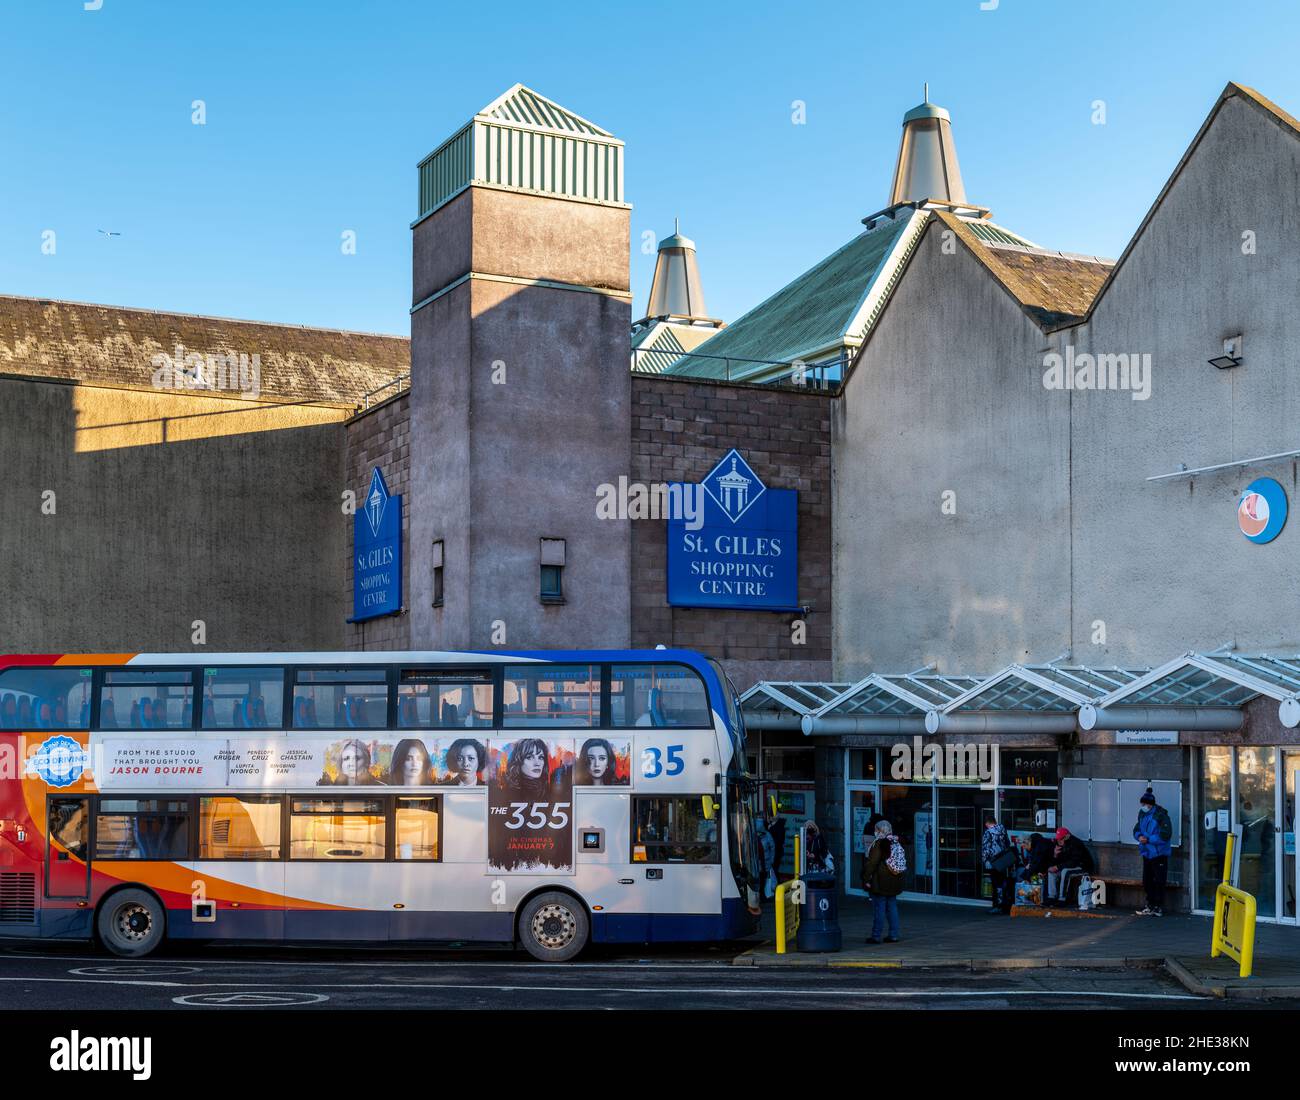 ELGIN, MORAY, SCOTLAND - 7 JANUARY 2022: - This is a view within the town centre of Elgin, Moray, Scotland on 7 January 2022 Stock Photo